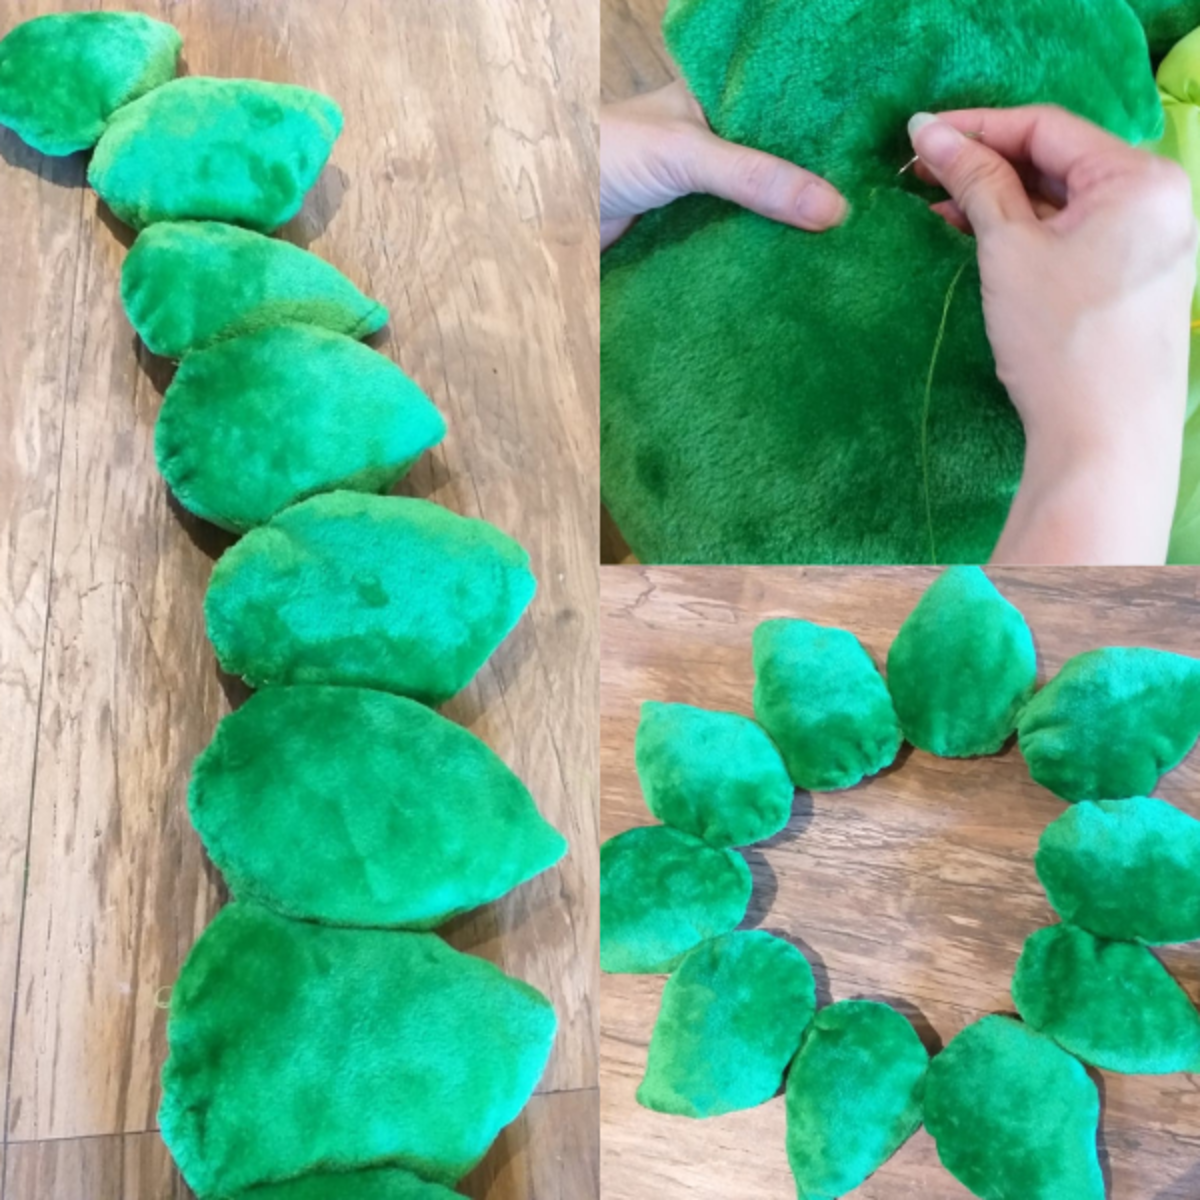 Sew the leaves together in a row, then create a circle by sewing the first and last leaves together.